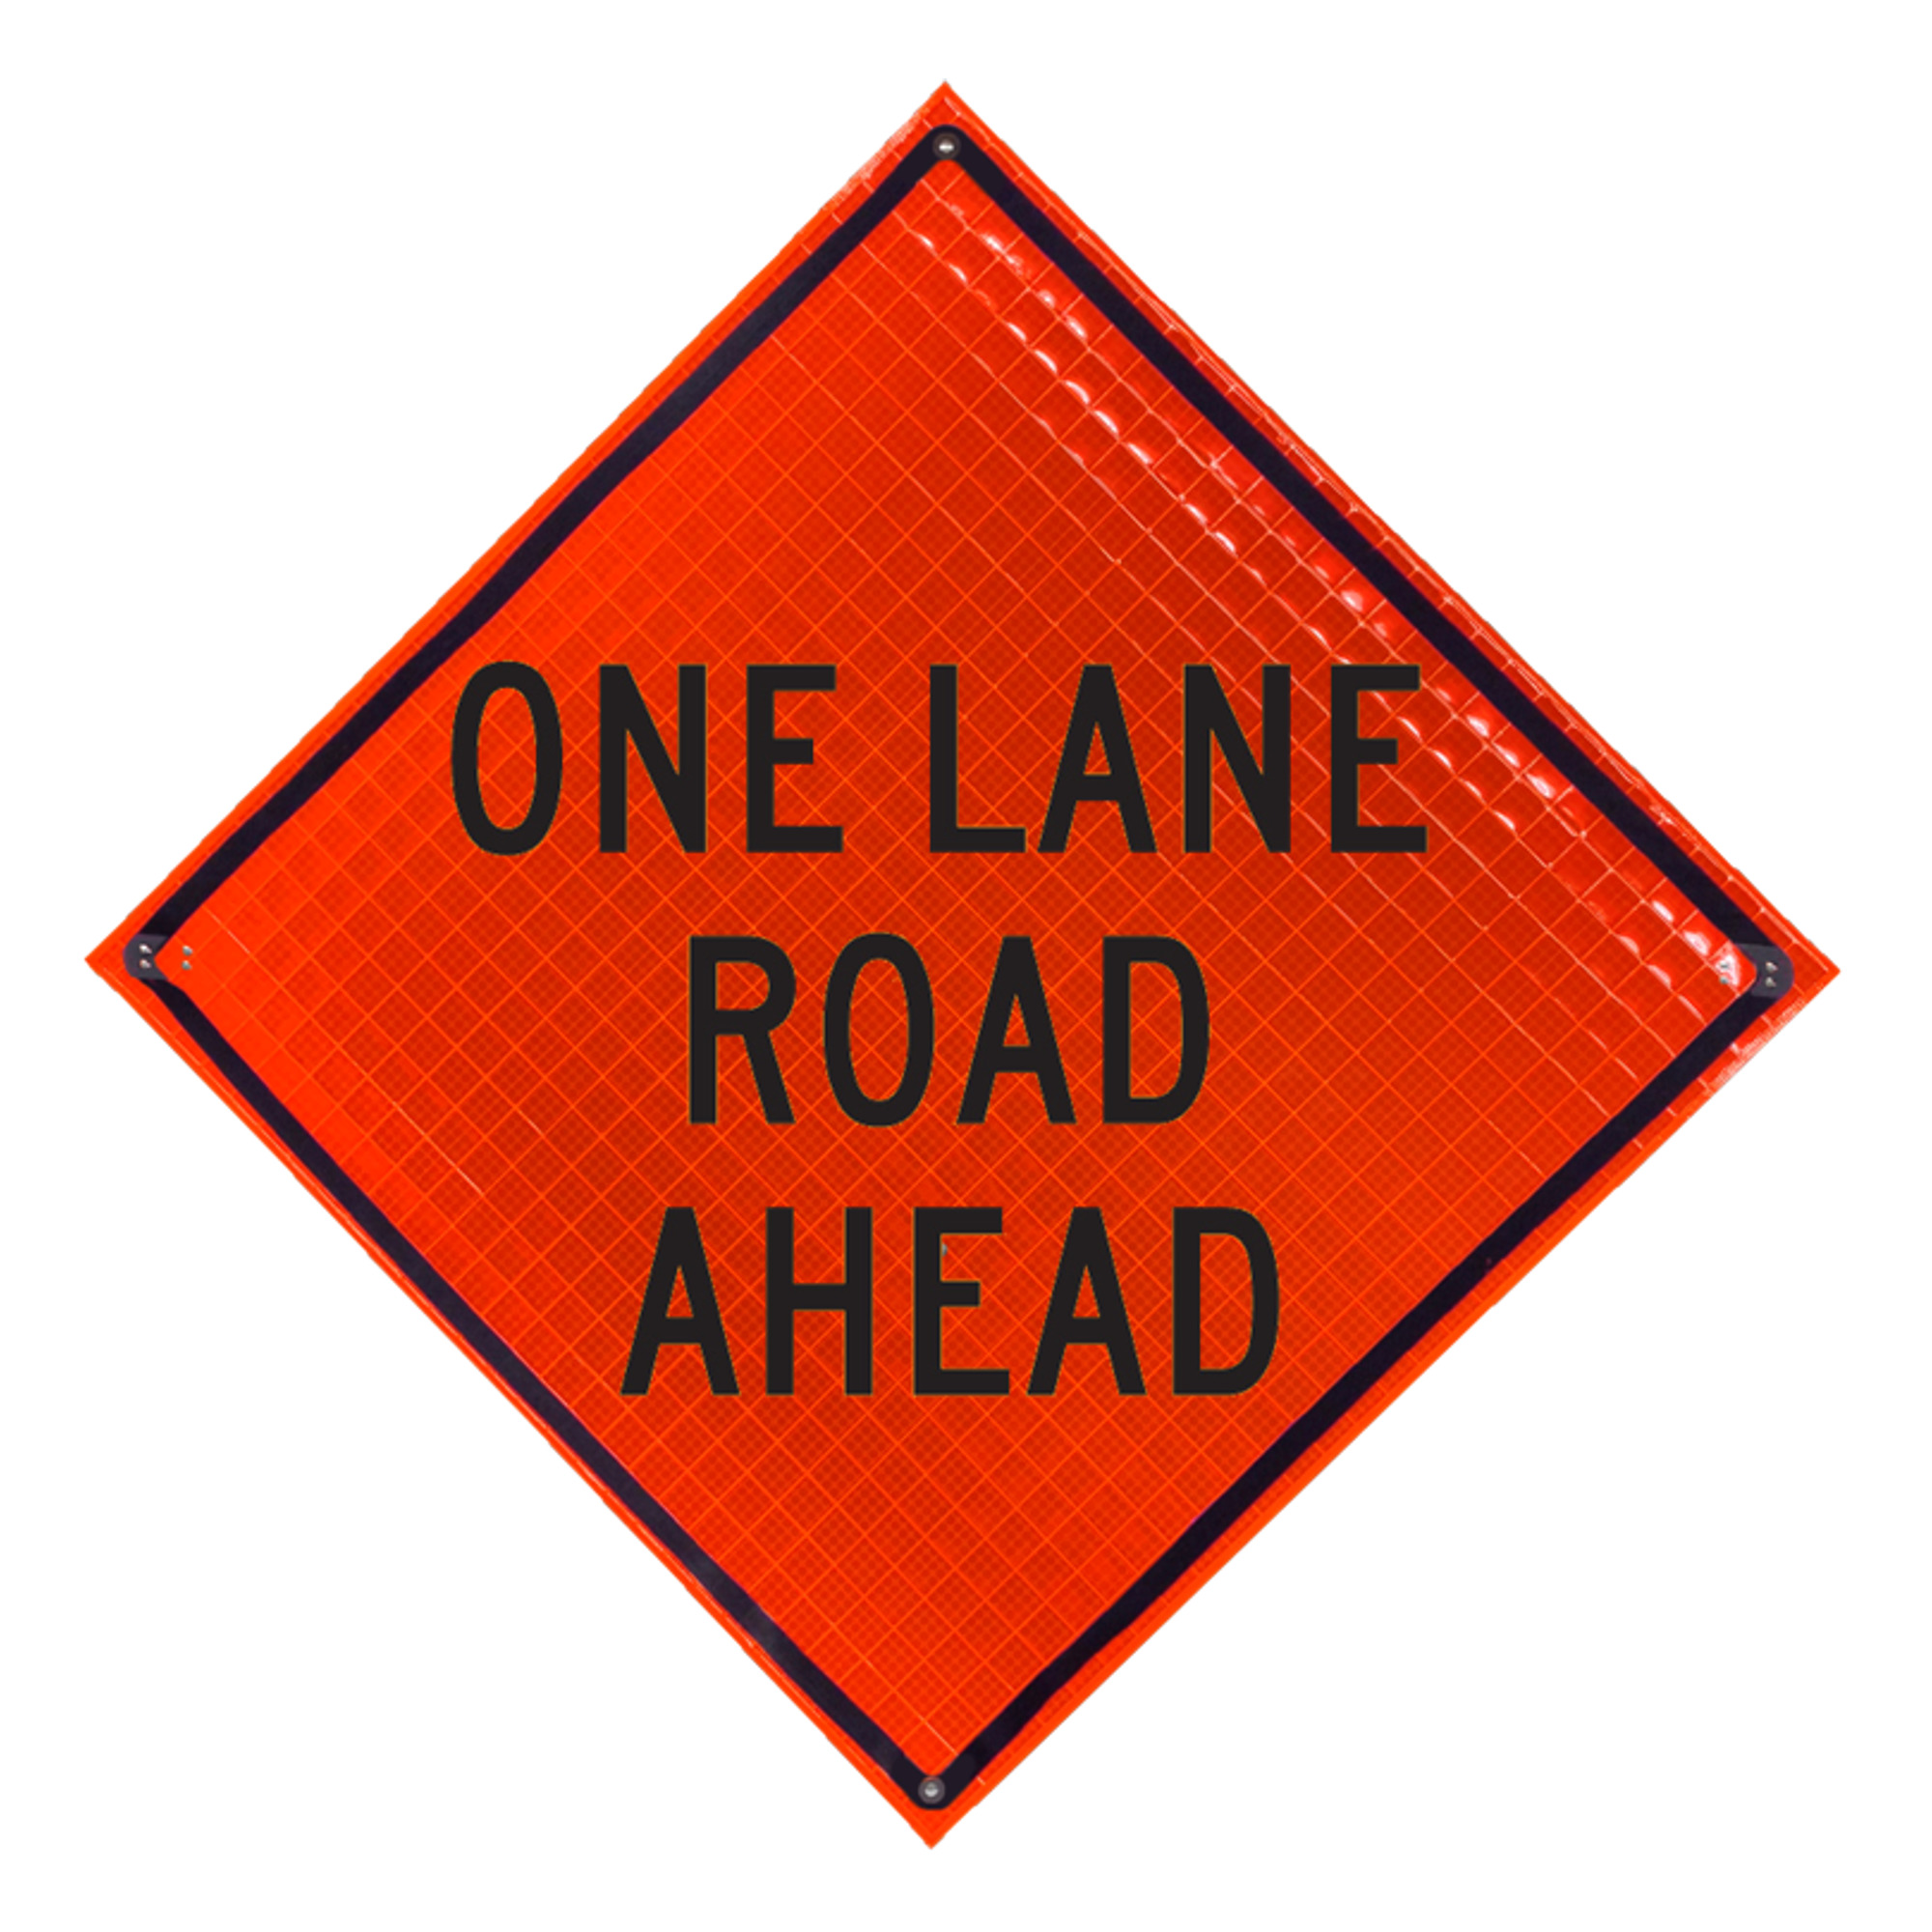 Eastern Metal, Super Bright Roll-up Sign, Sign Message One Lane Road Ahead, Height 36 in, Width 36 in, Model C-36-SBO-4LEX-OLRA